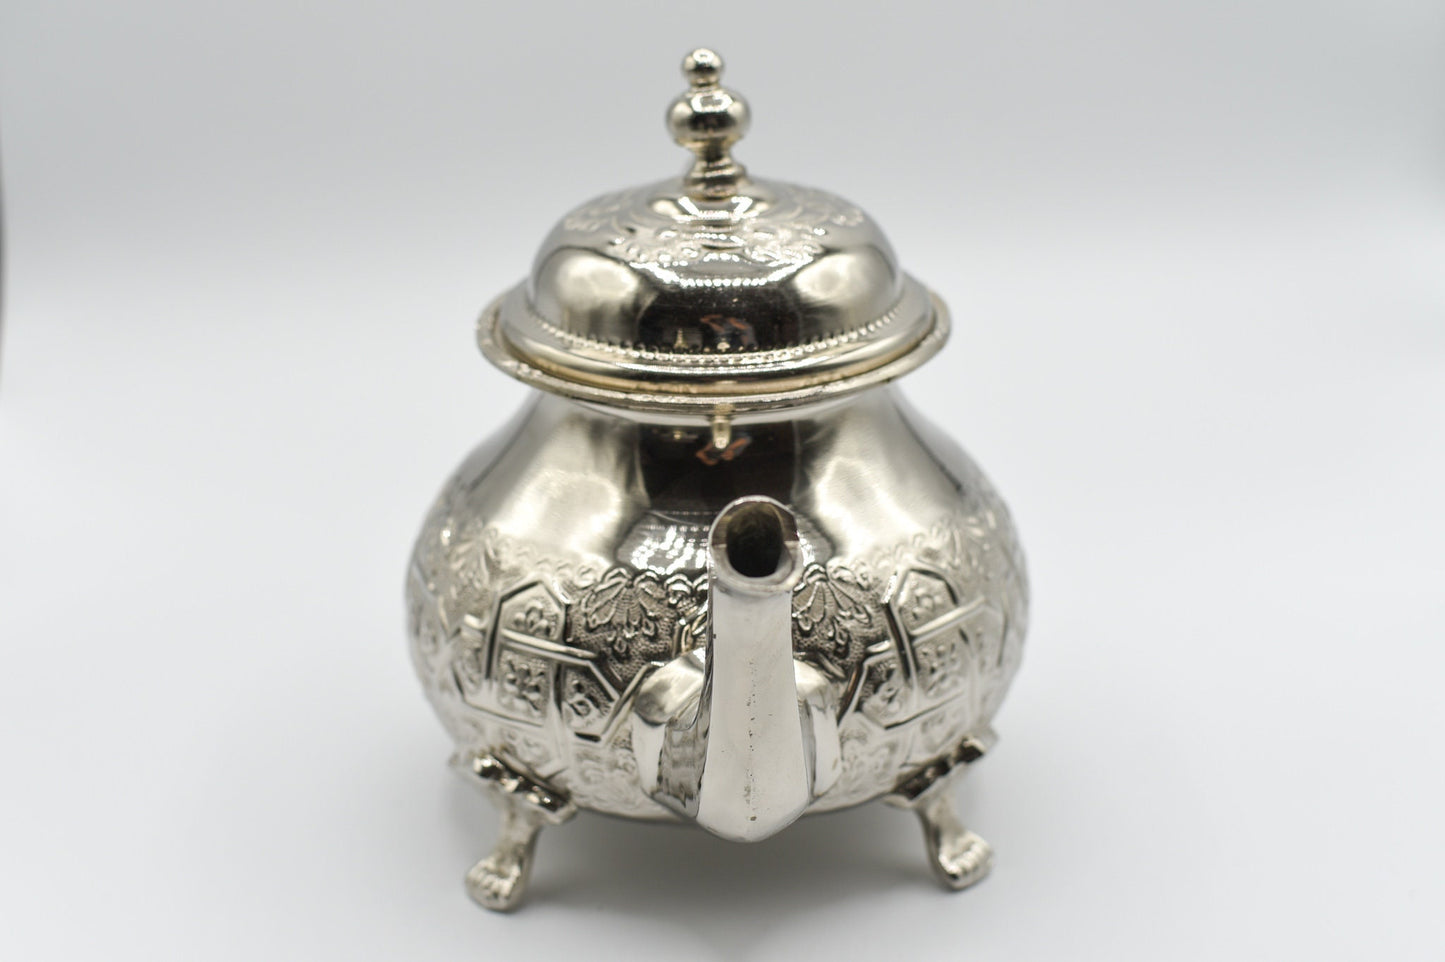 Moroccan traditional Handmade Silver Teapot  Large Size *THREE STYLES*